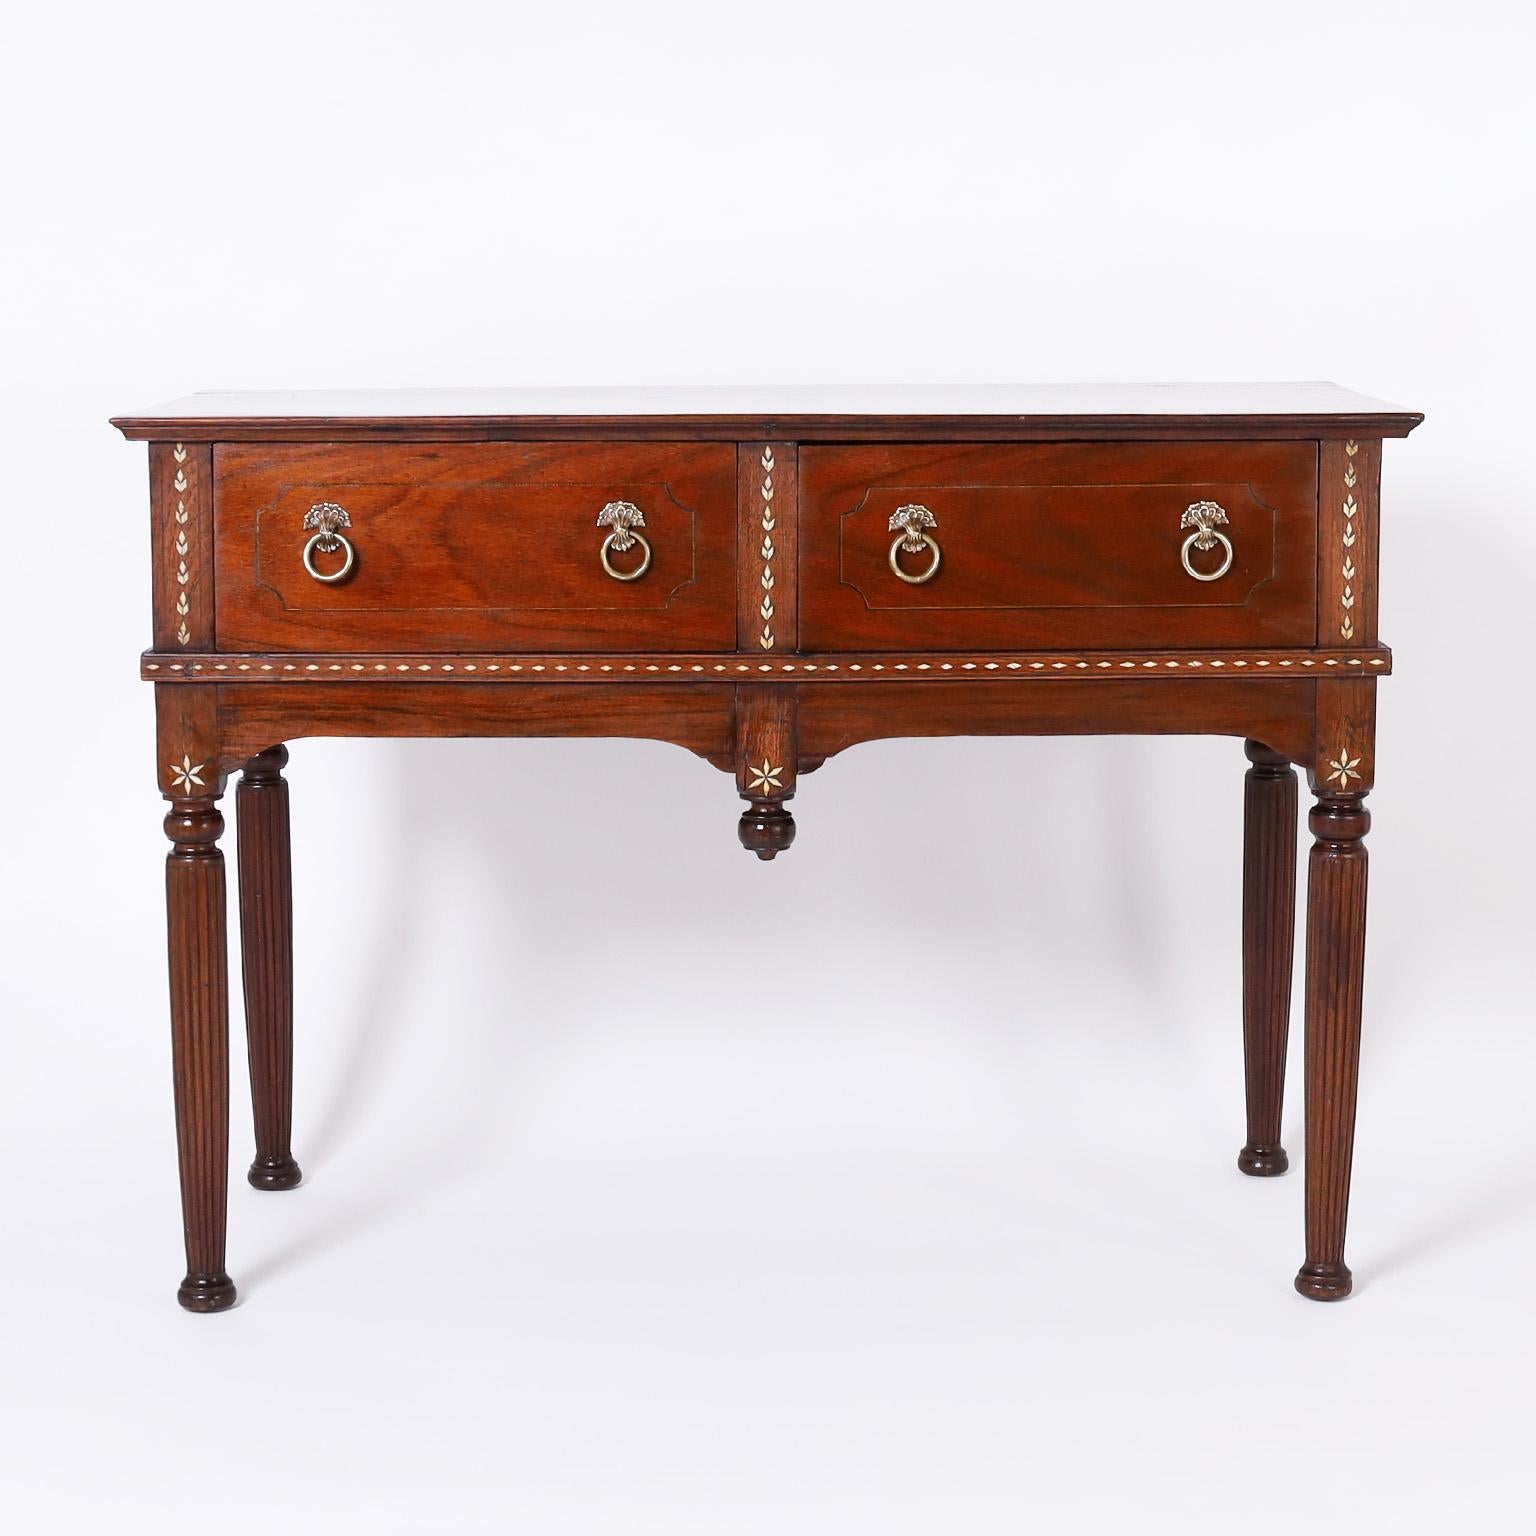 Rare and remarkable 19th century British colonial two drawer server from the Philippines, handcrafted in mahogany with a lush grain, featuring pegged construction, brass hardware, seashell inlays and elegant turned and beaded legs.